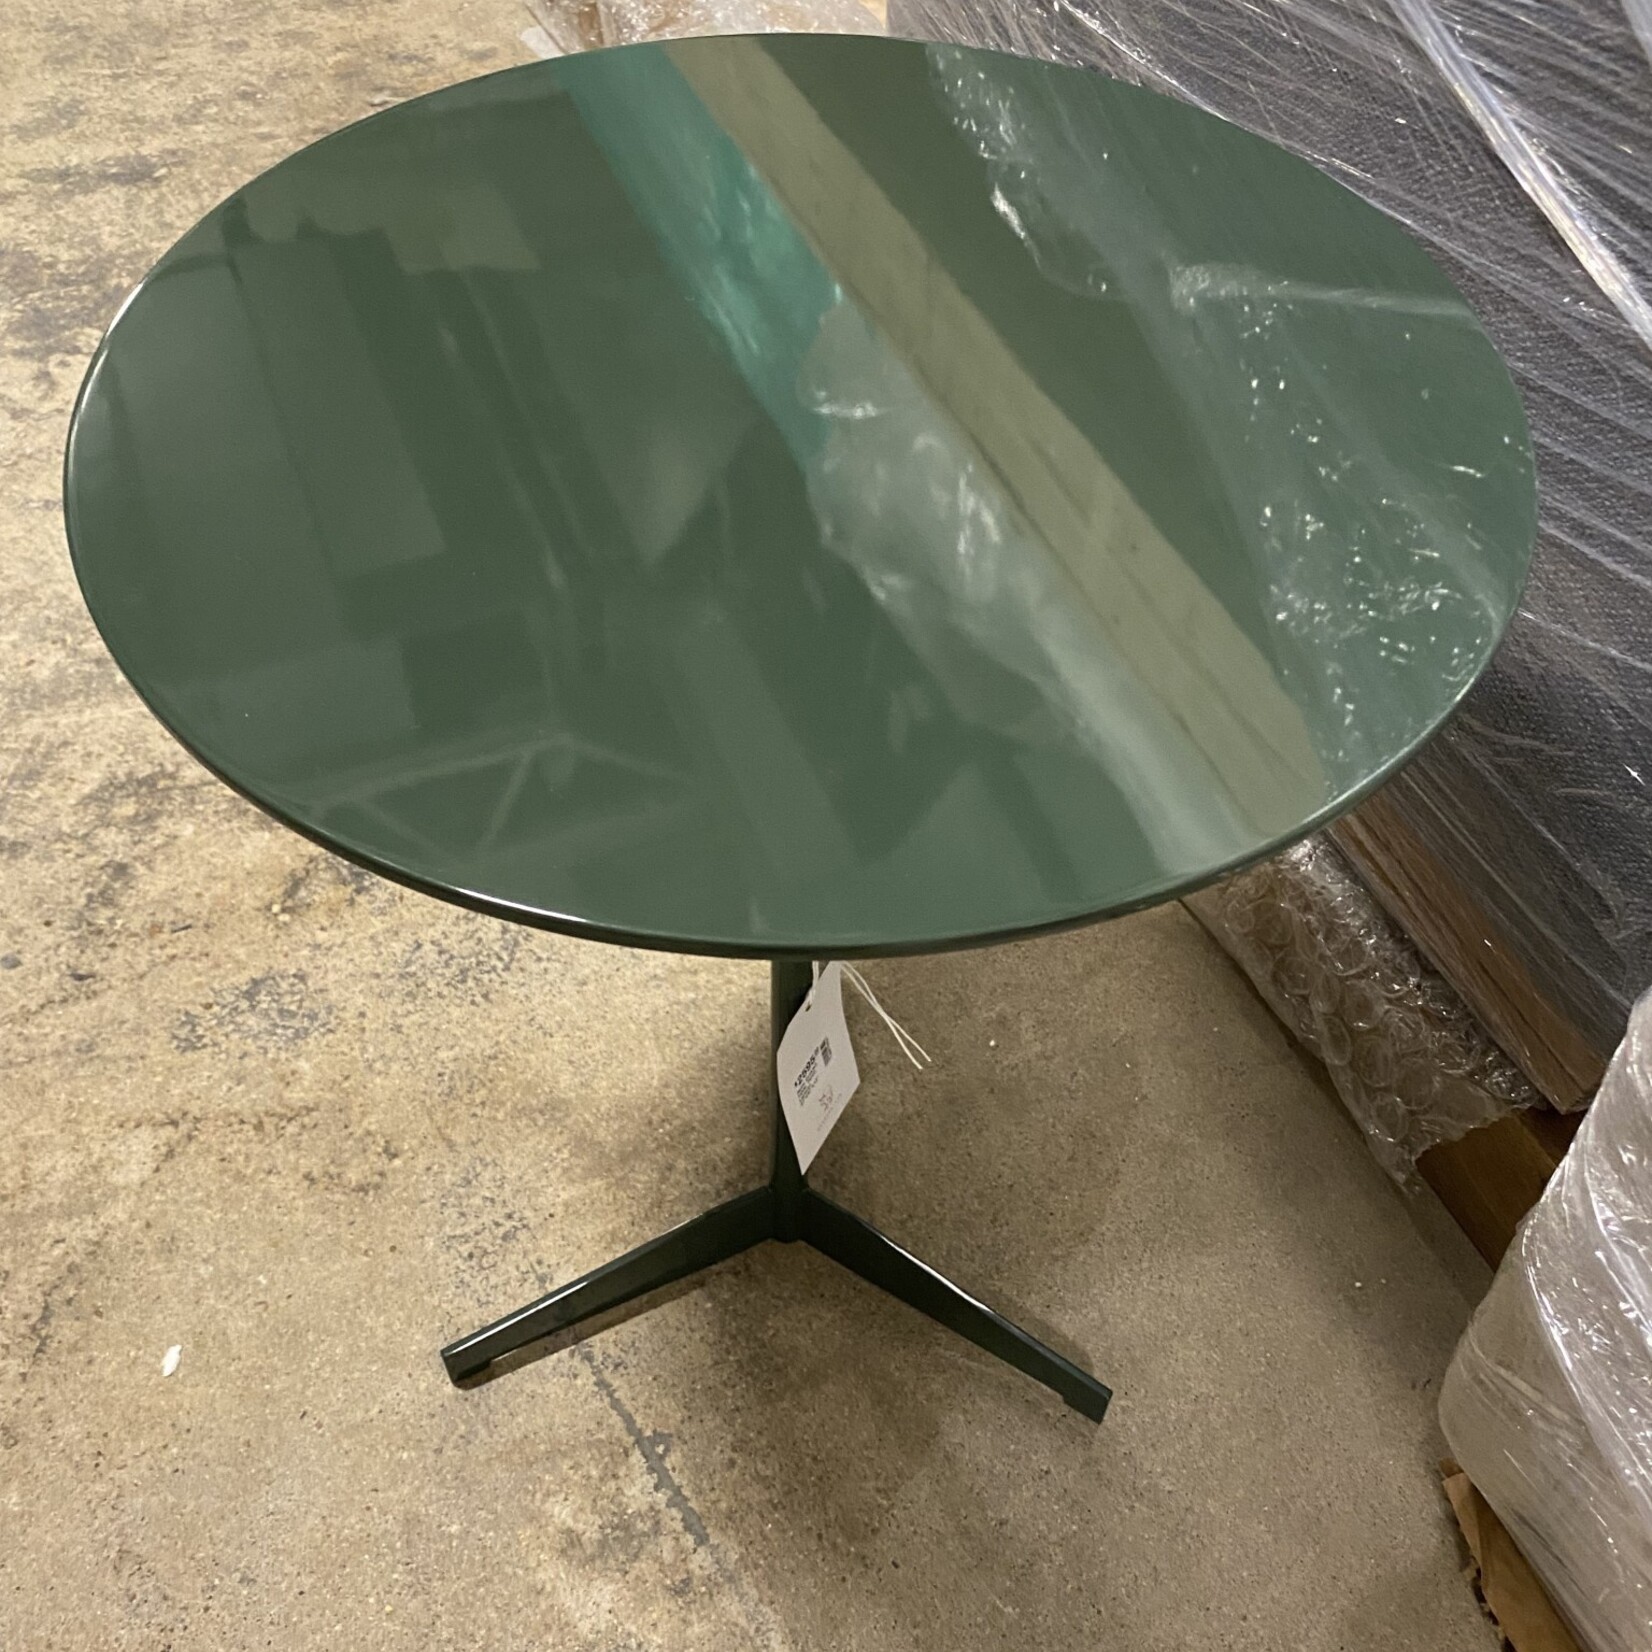 Folha Round Cocktail Table, Green Lacquer 16"x16"x20"